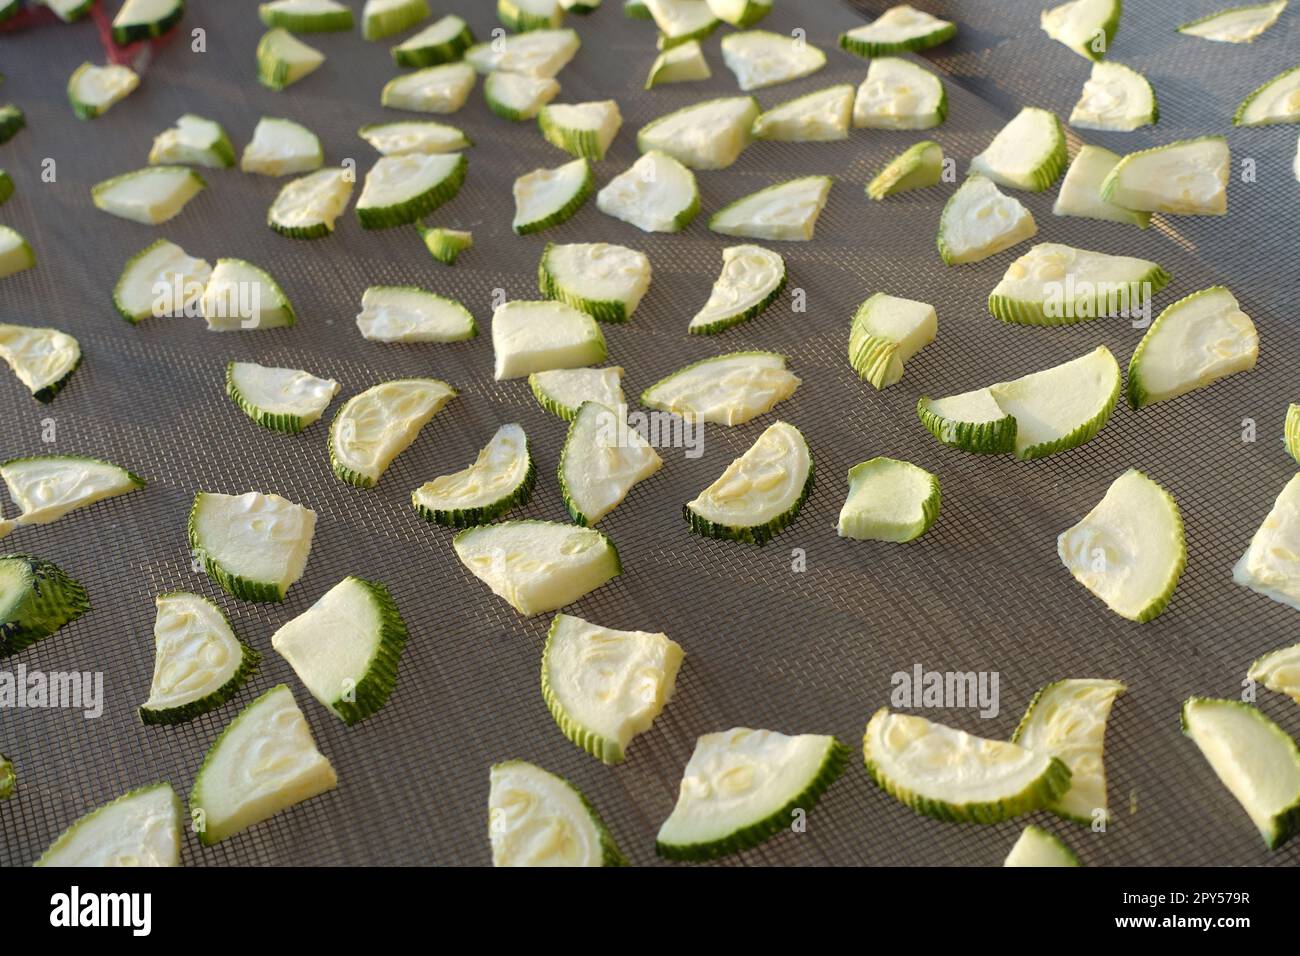 drying zucchini, drying vegetables in the sun, dried zucchini, drying sliced zucchini Stock Photo